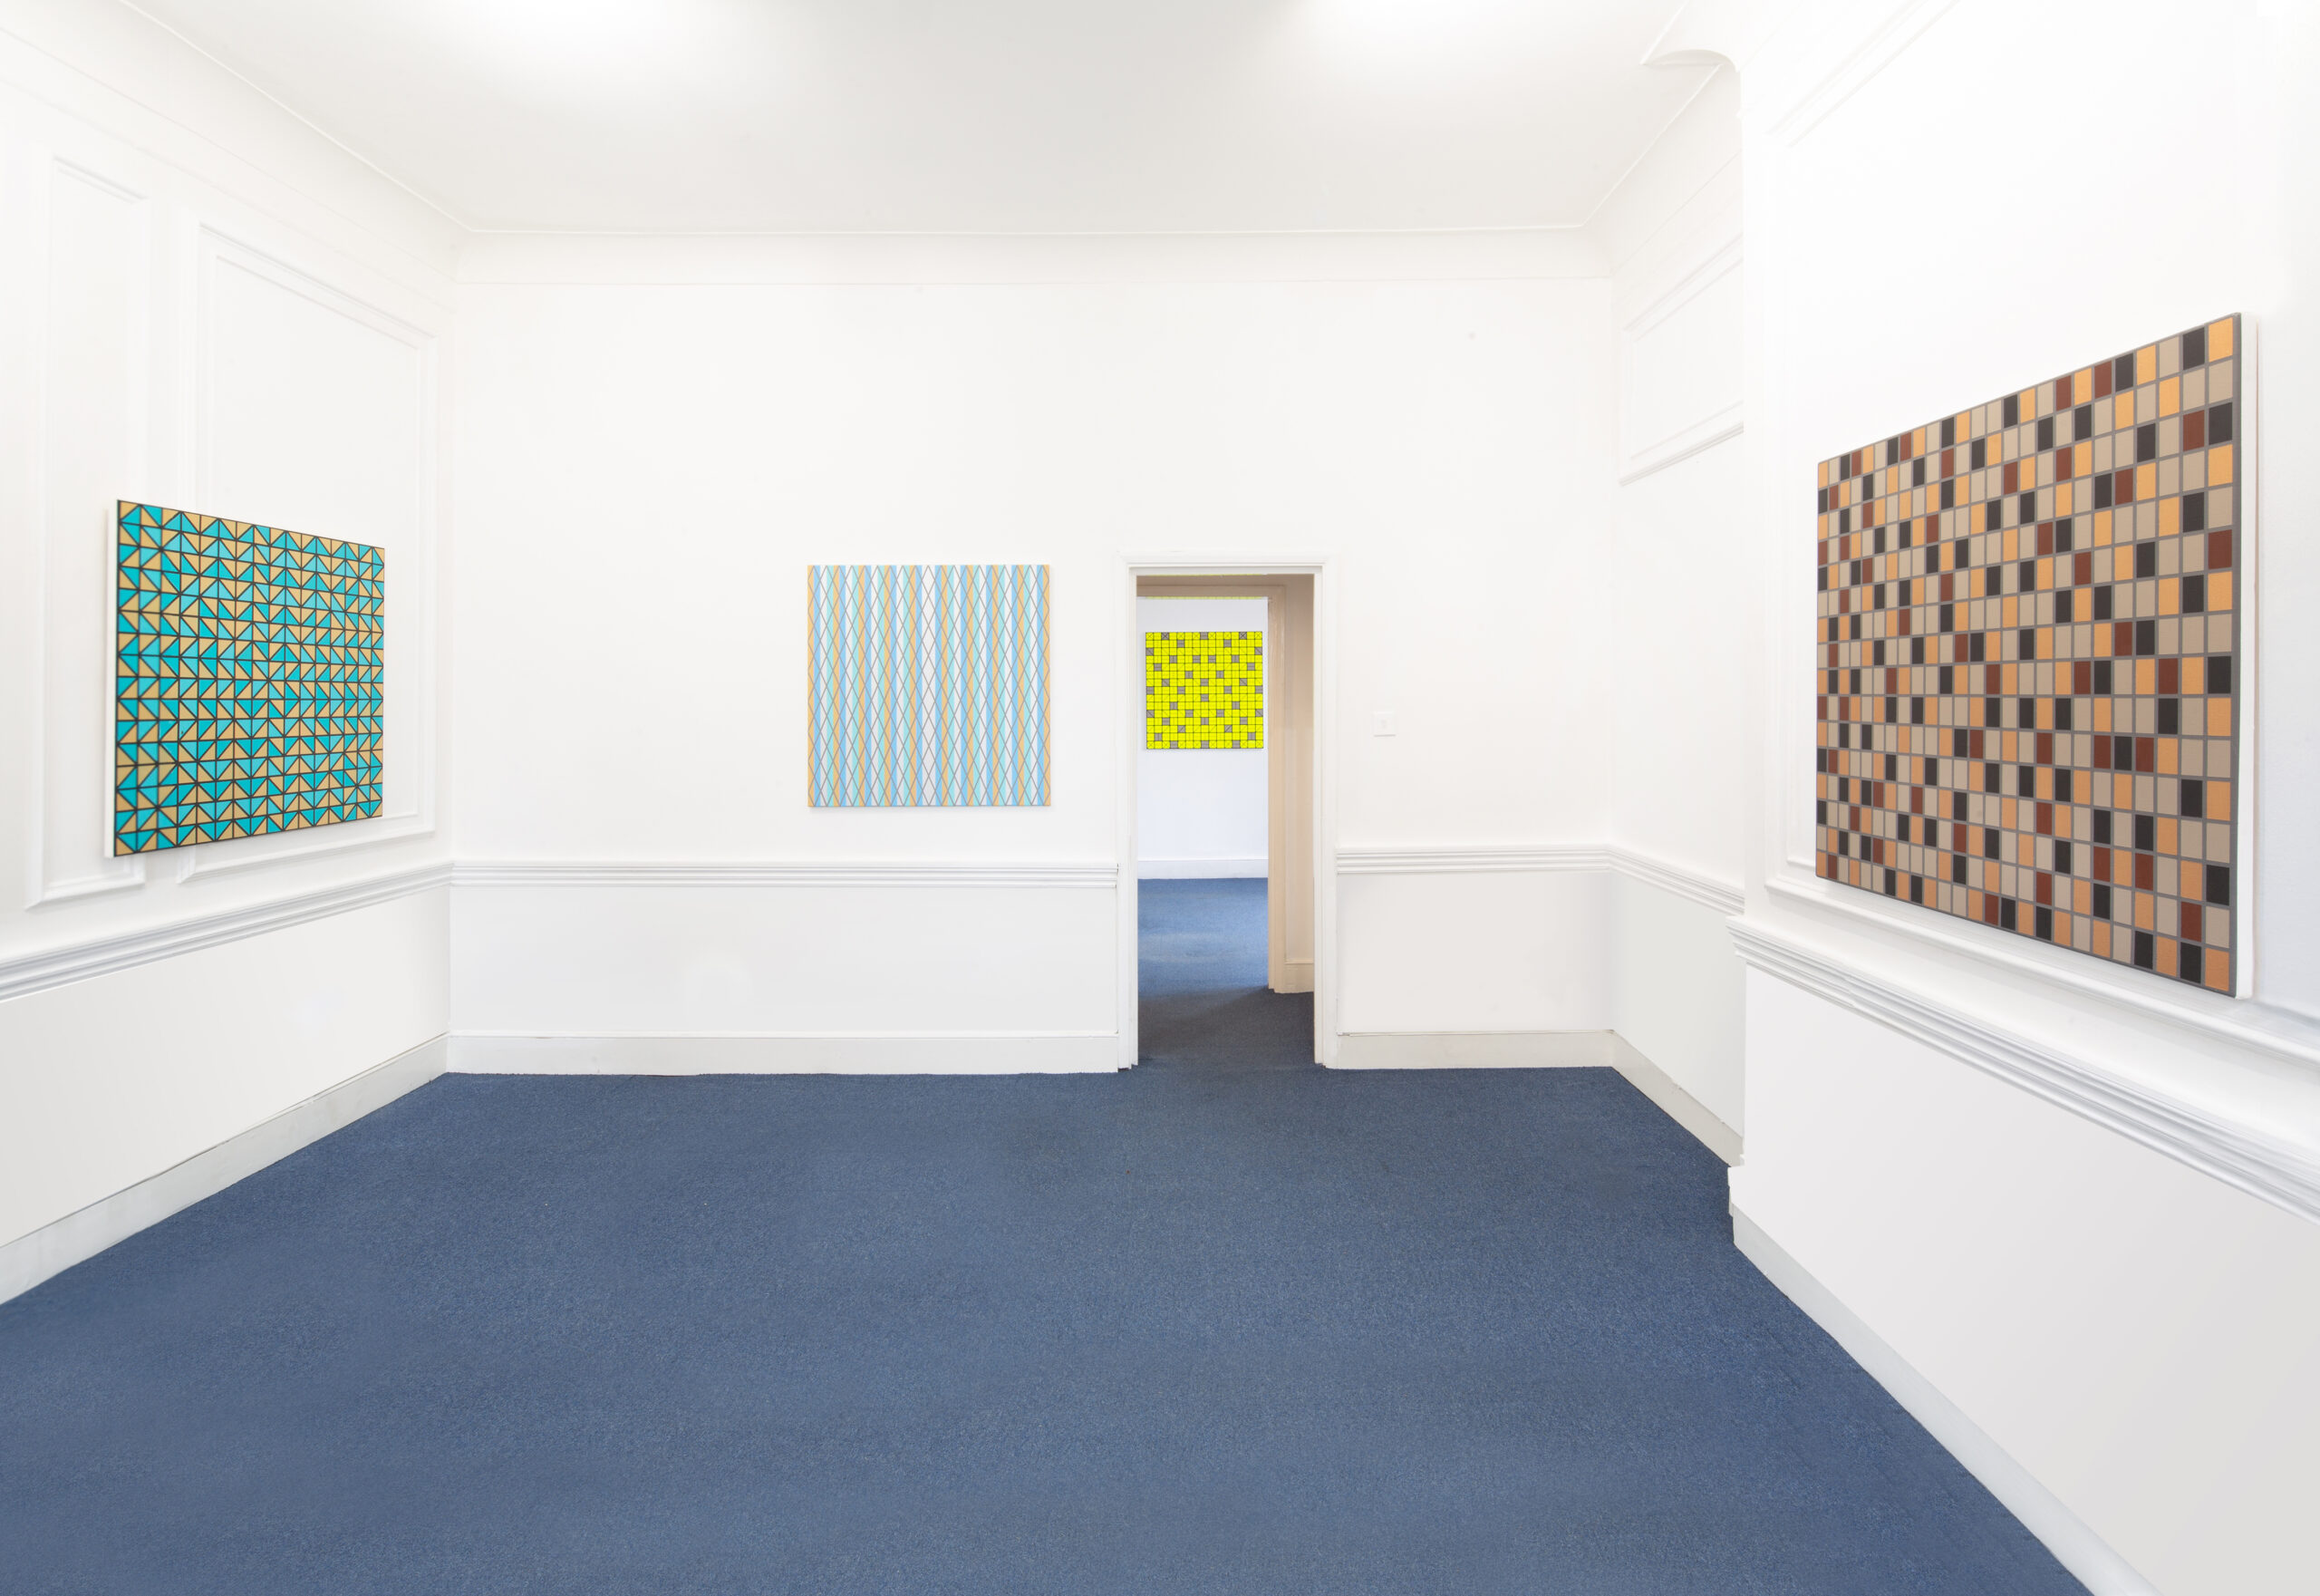 Richard Kirwan 'Intellectual Property' at Lungley Gallery, exhibition view, 2022.